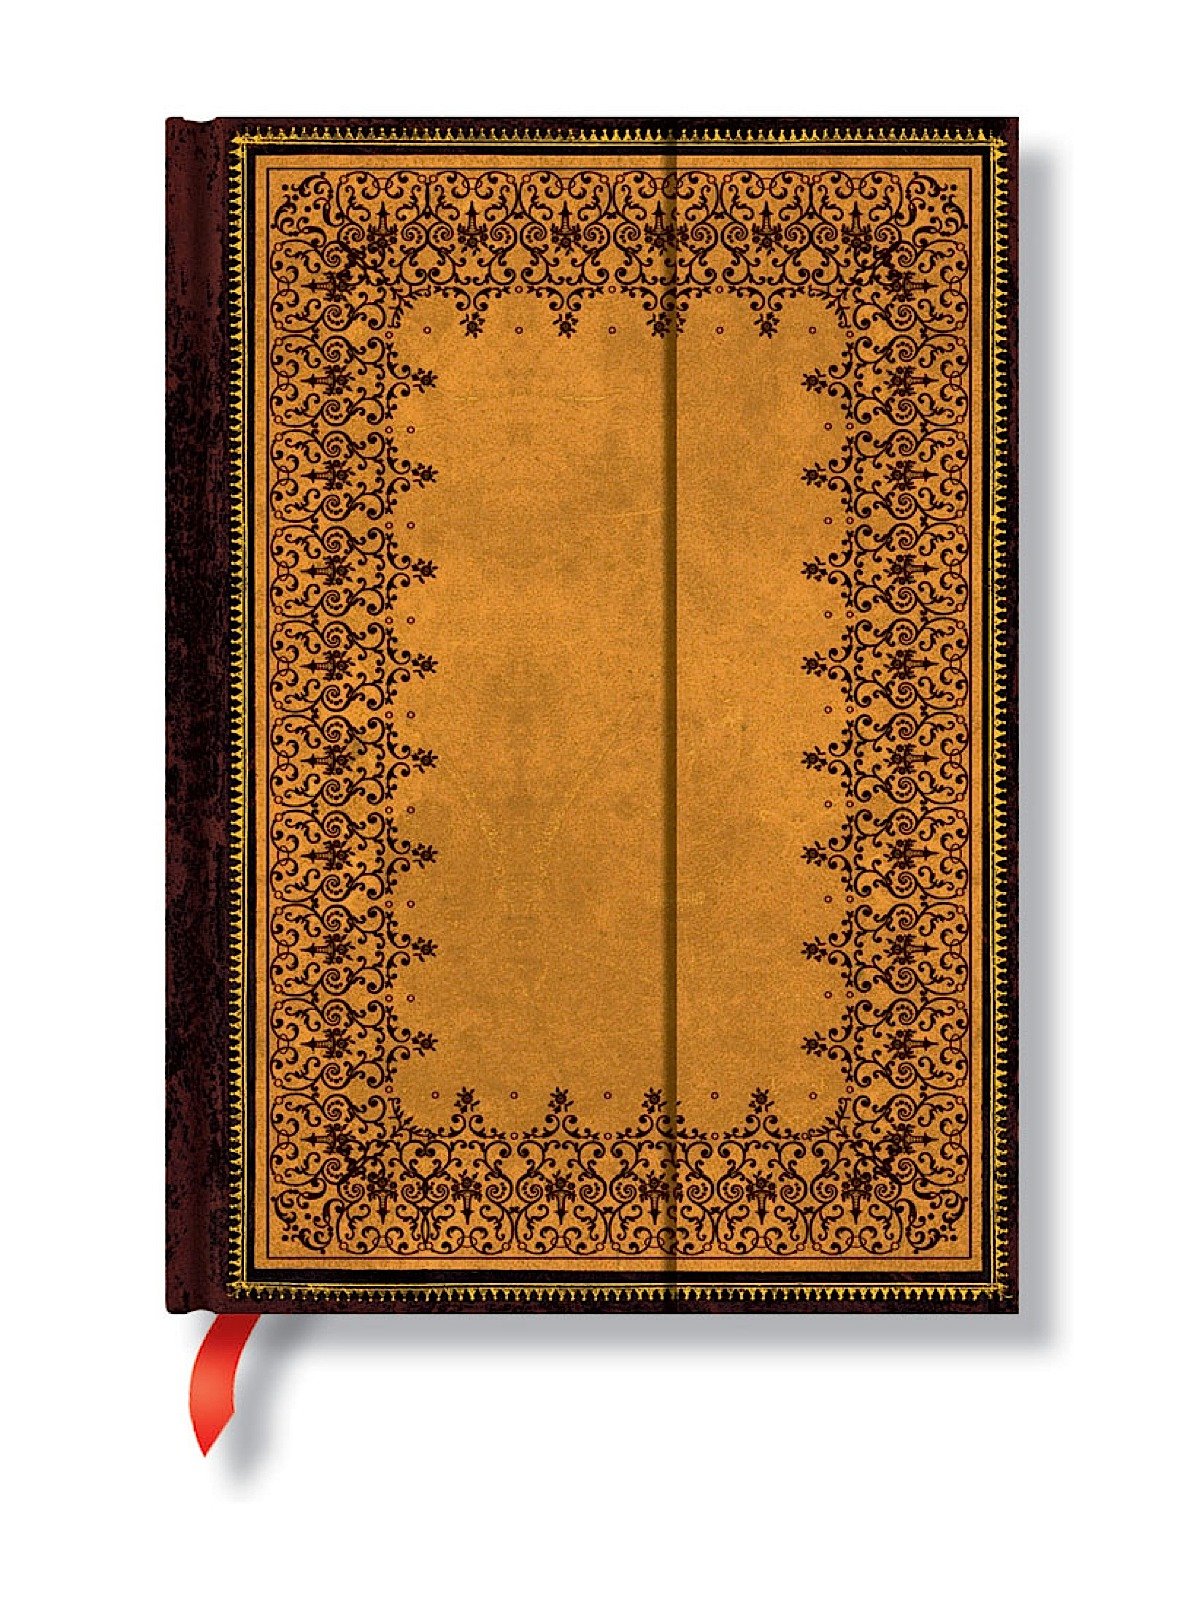 Paperblanks - Old Leather Journals